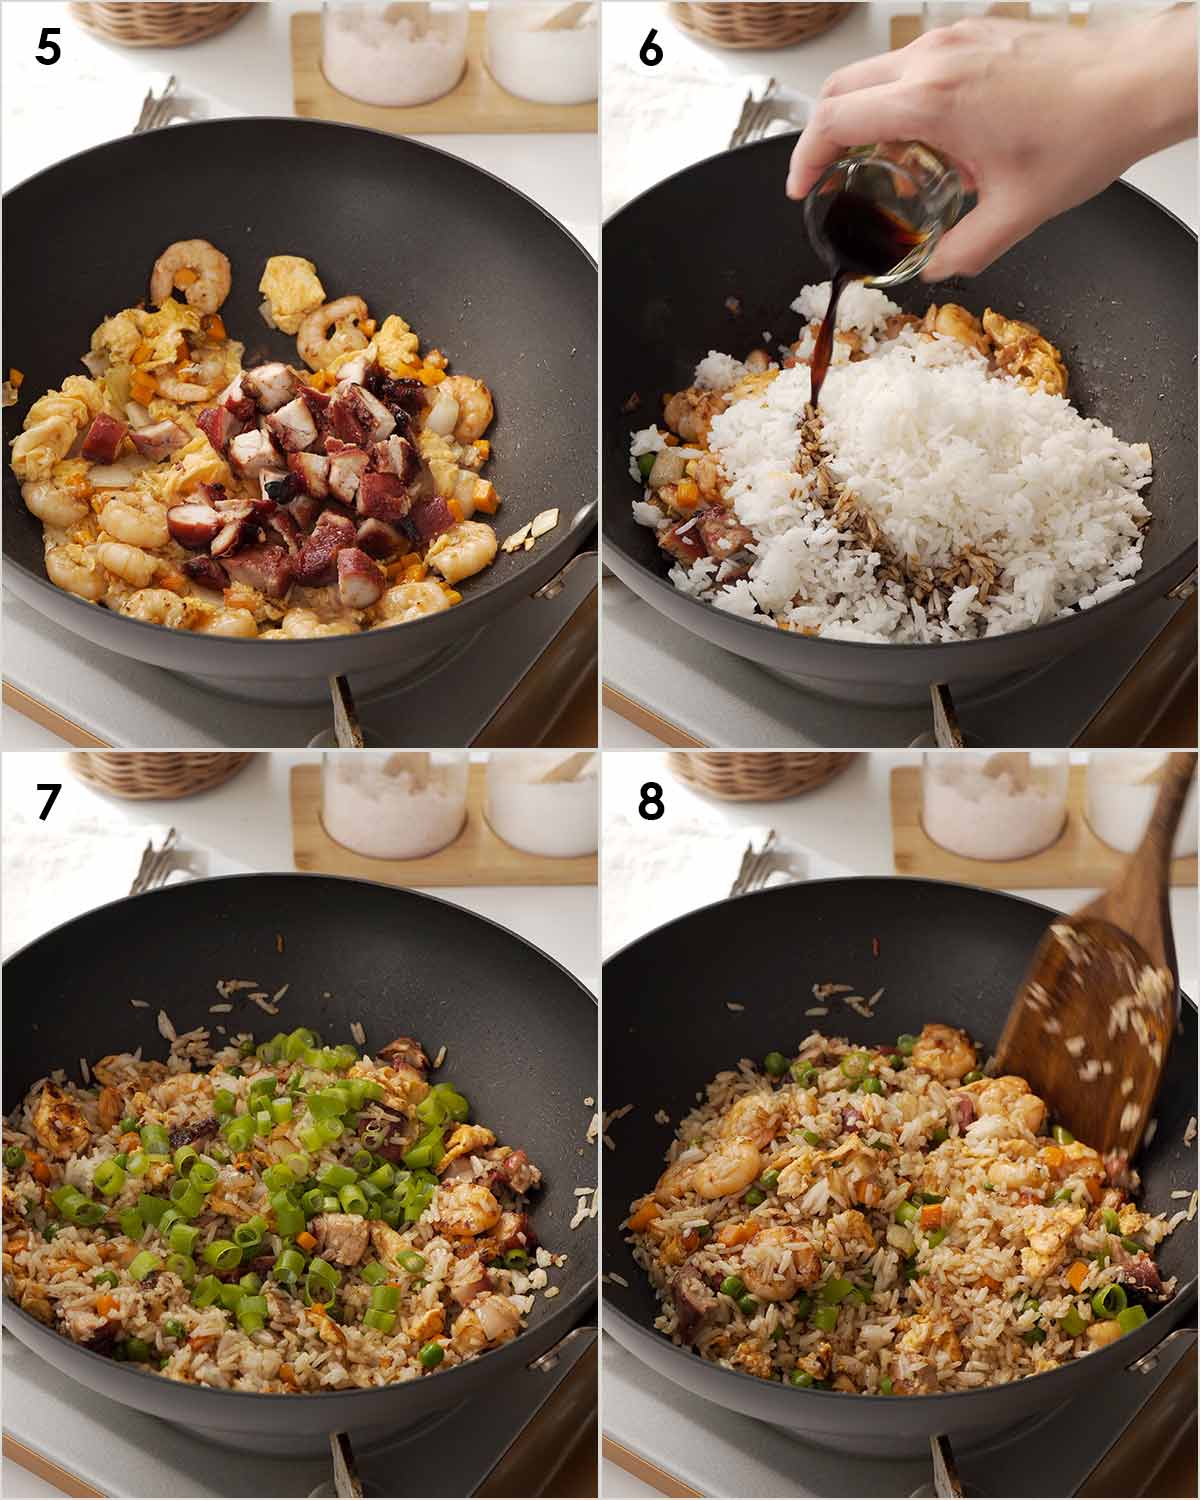 4 image college showing how to stir fry rice with prawns, char siu, egg, and peas. 